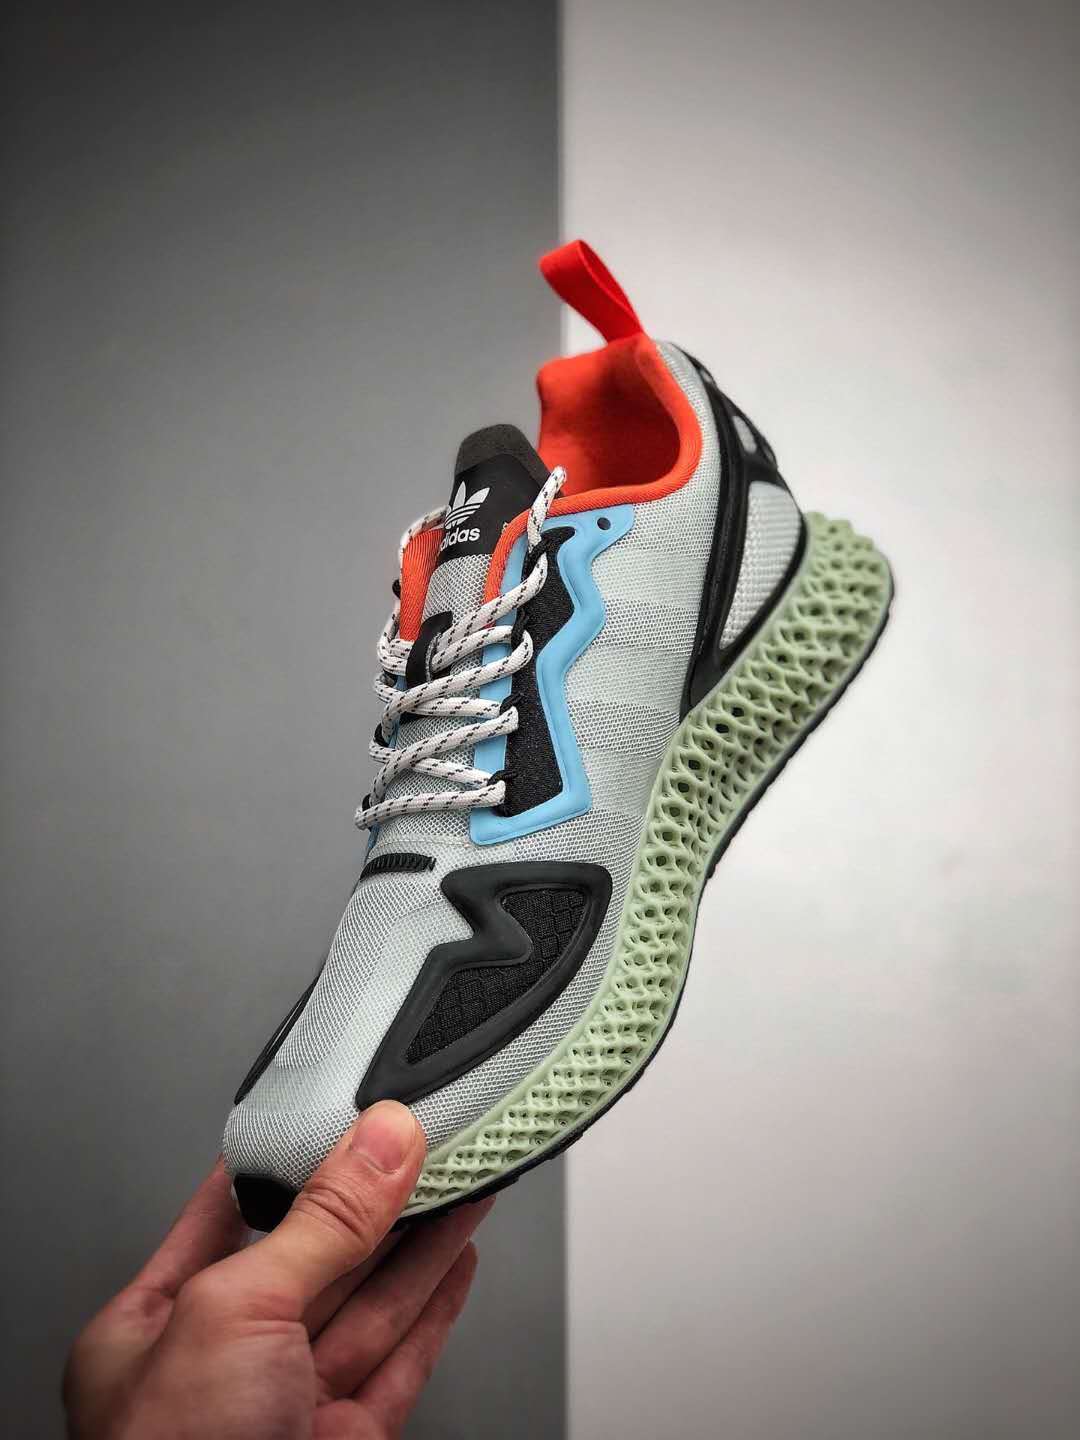 Adidas ZX 2K 4D Dash Green FV8500 - Innovative Design and Comfort | Fast Shipping